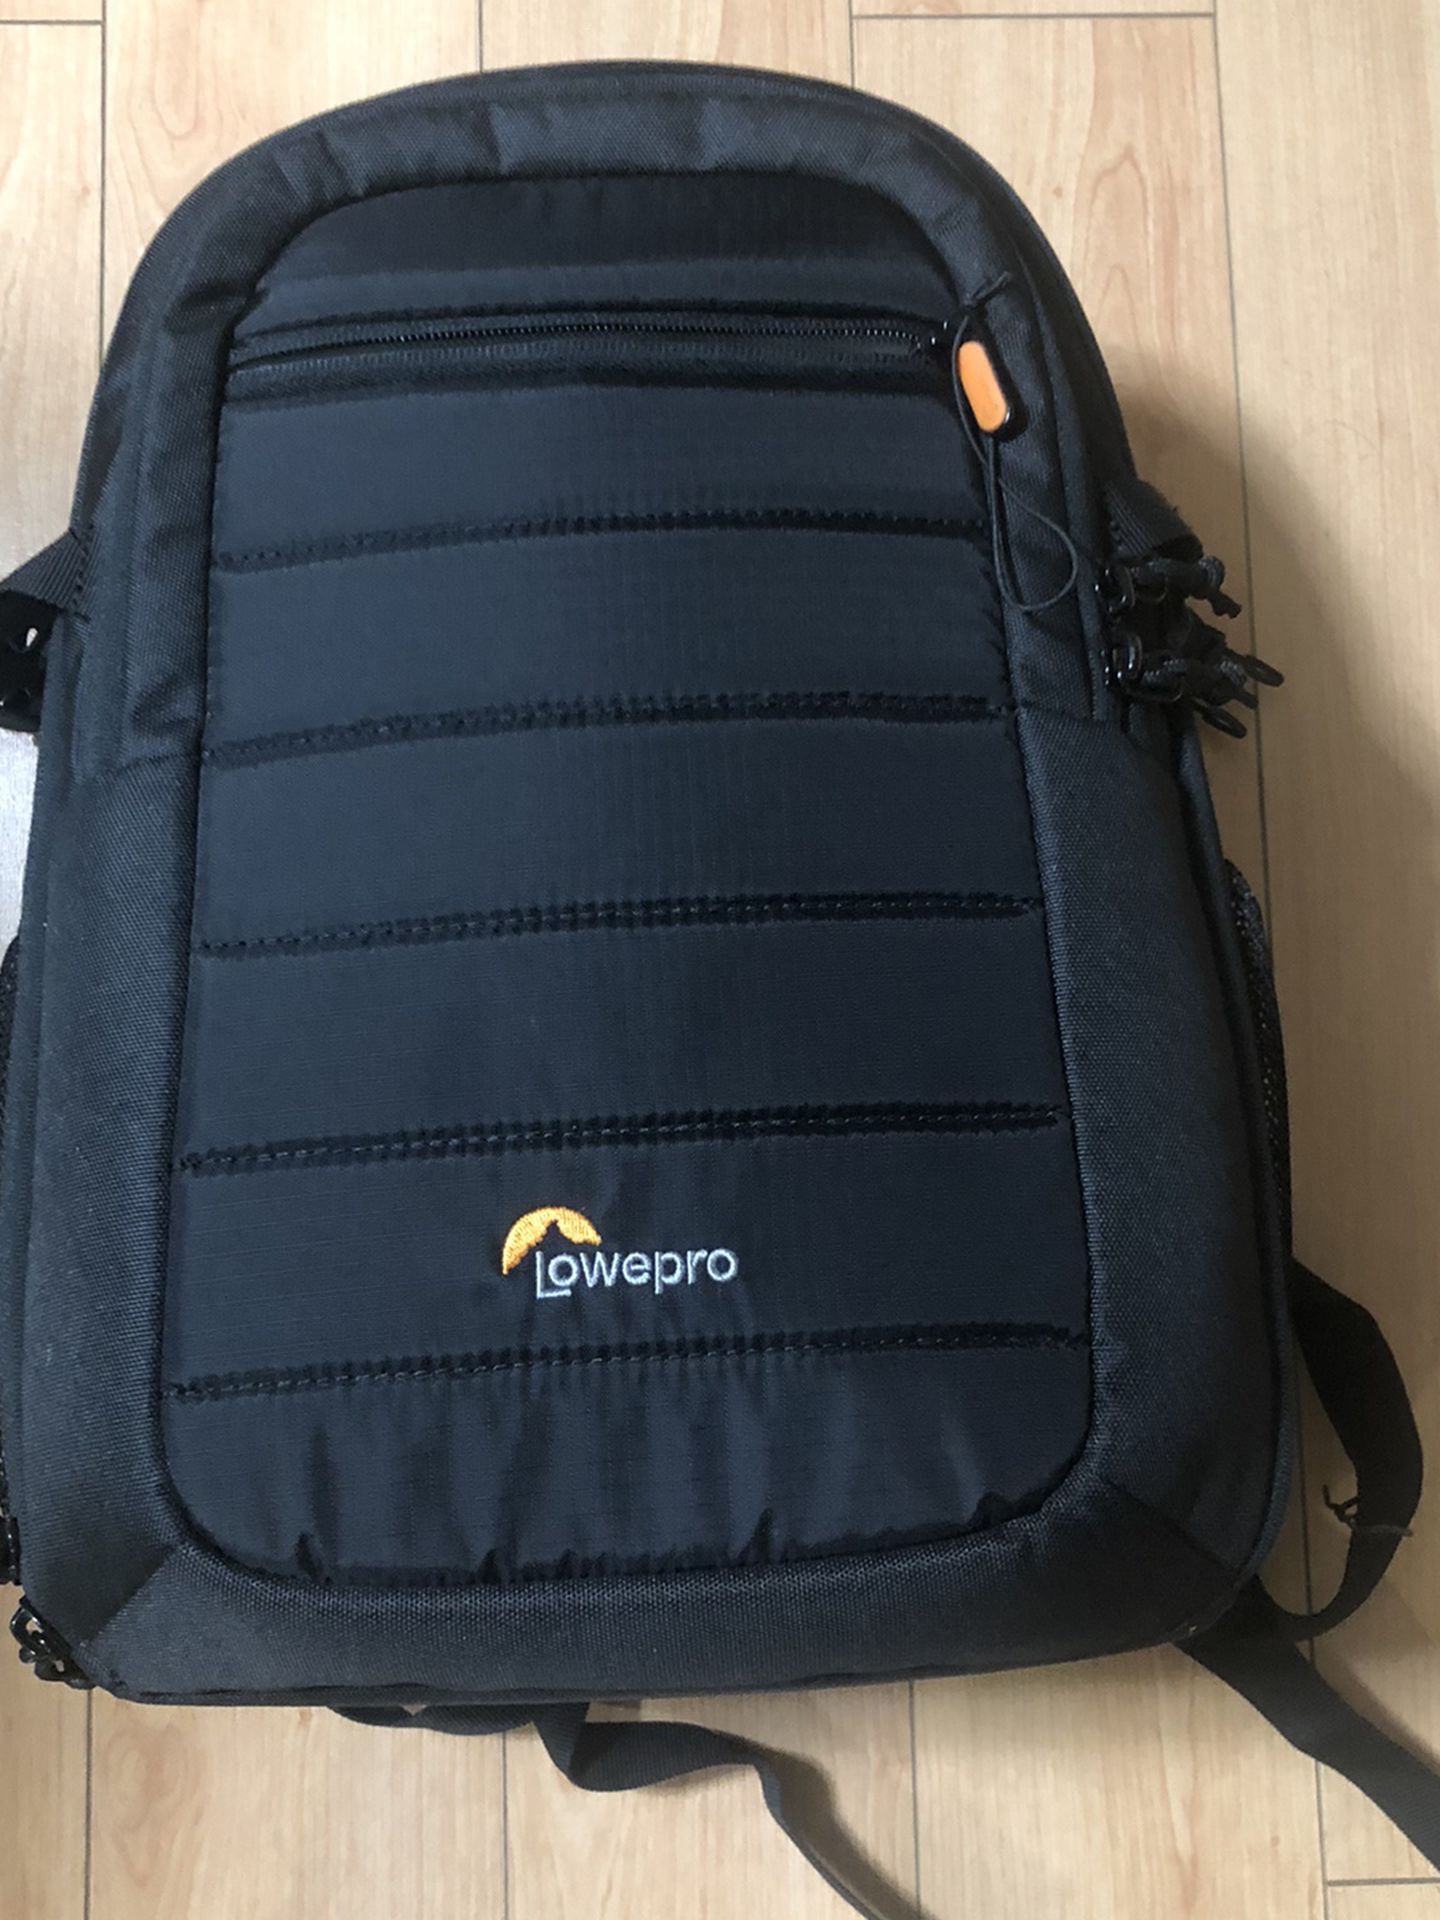 Lowepro Camera Or Drone Backpack